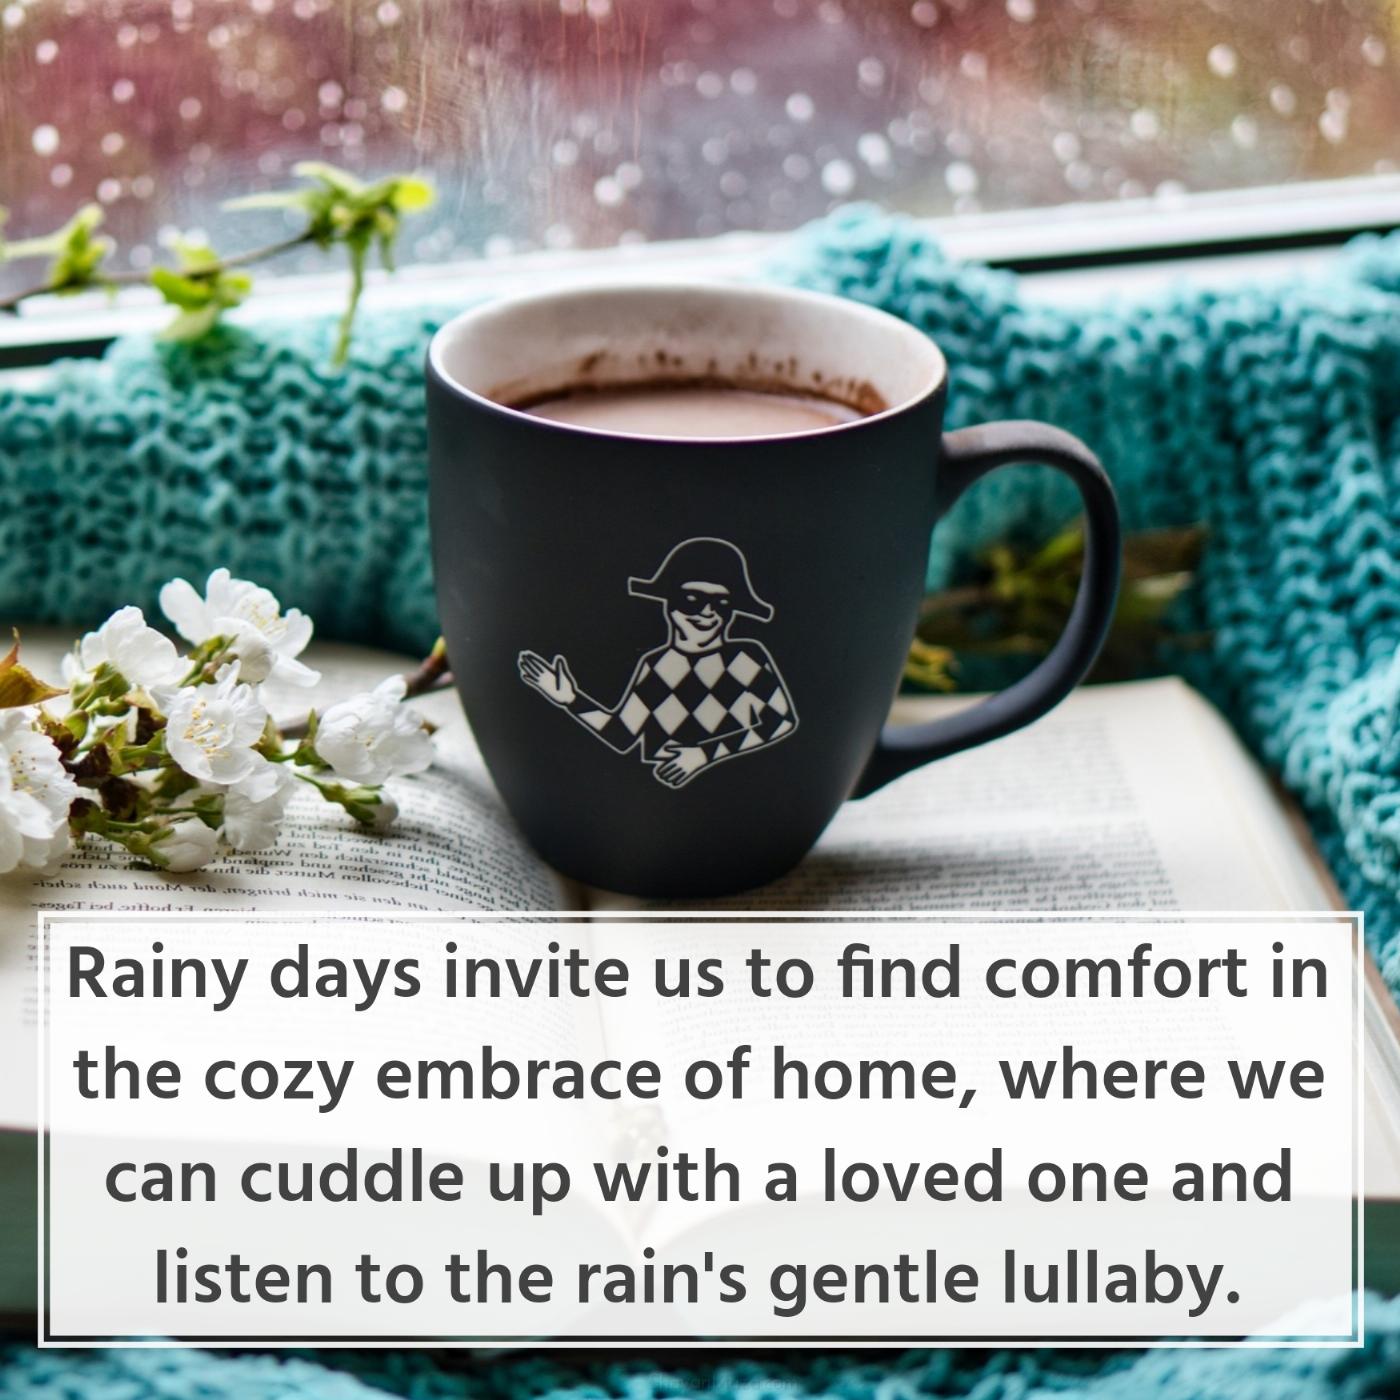 Rainy days invite us to find comfort in the cozy embrace of home